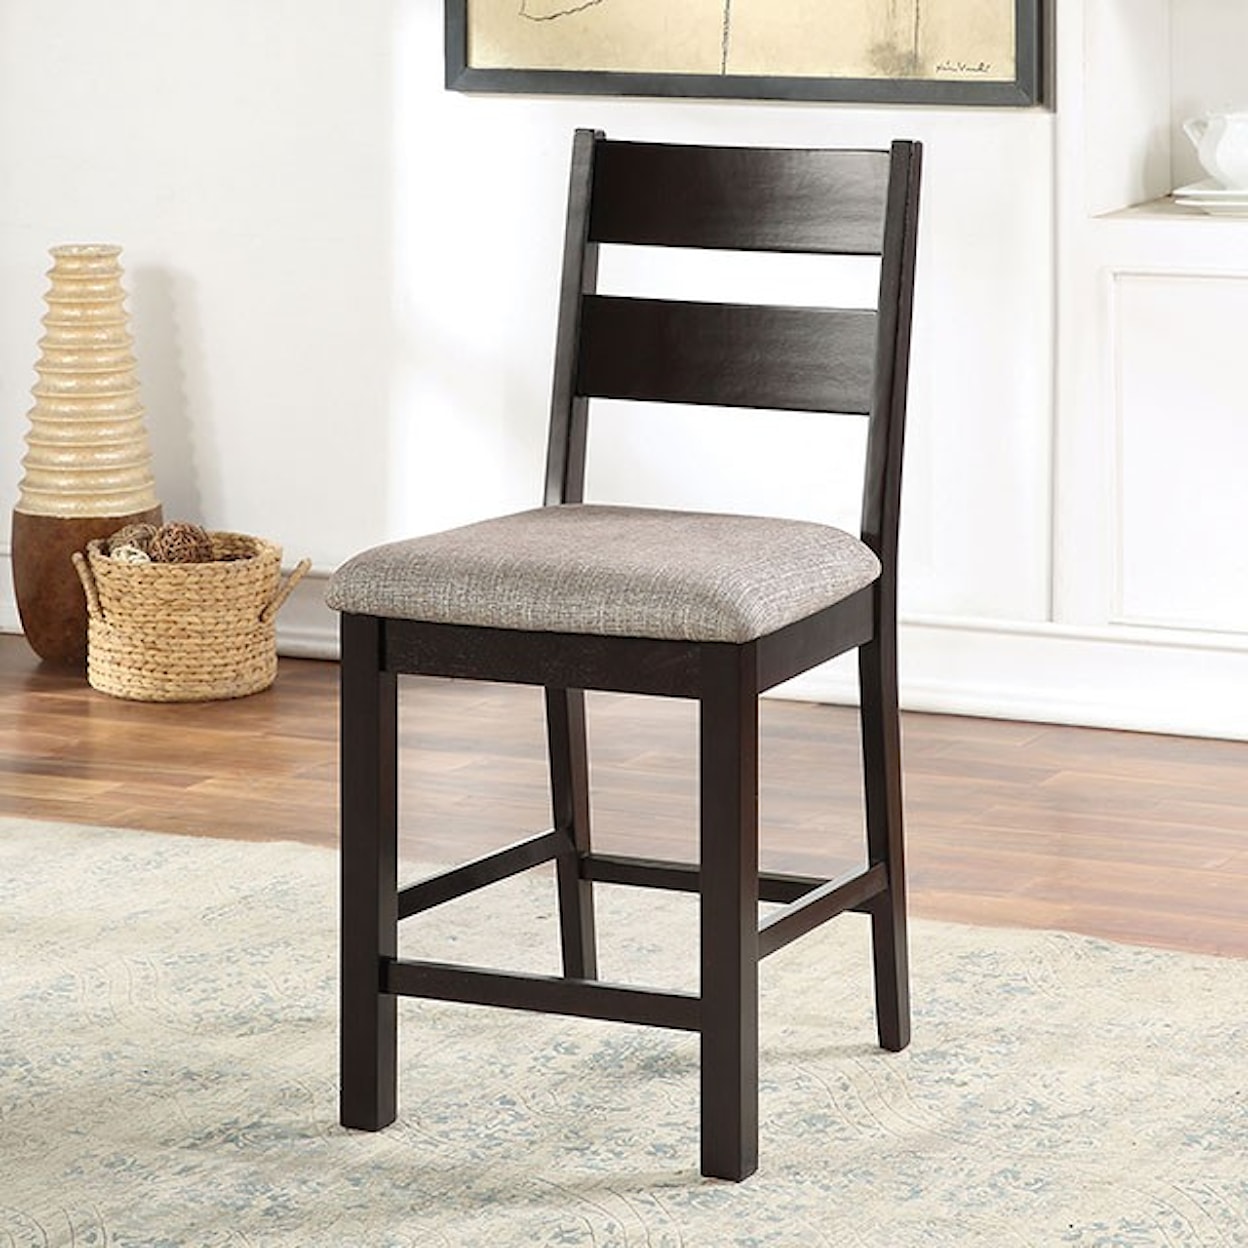 Furniture of America Valdor 2-Piece Counter Height Chair Set